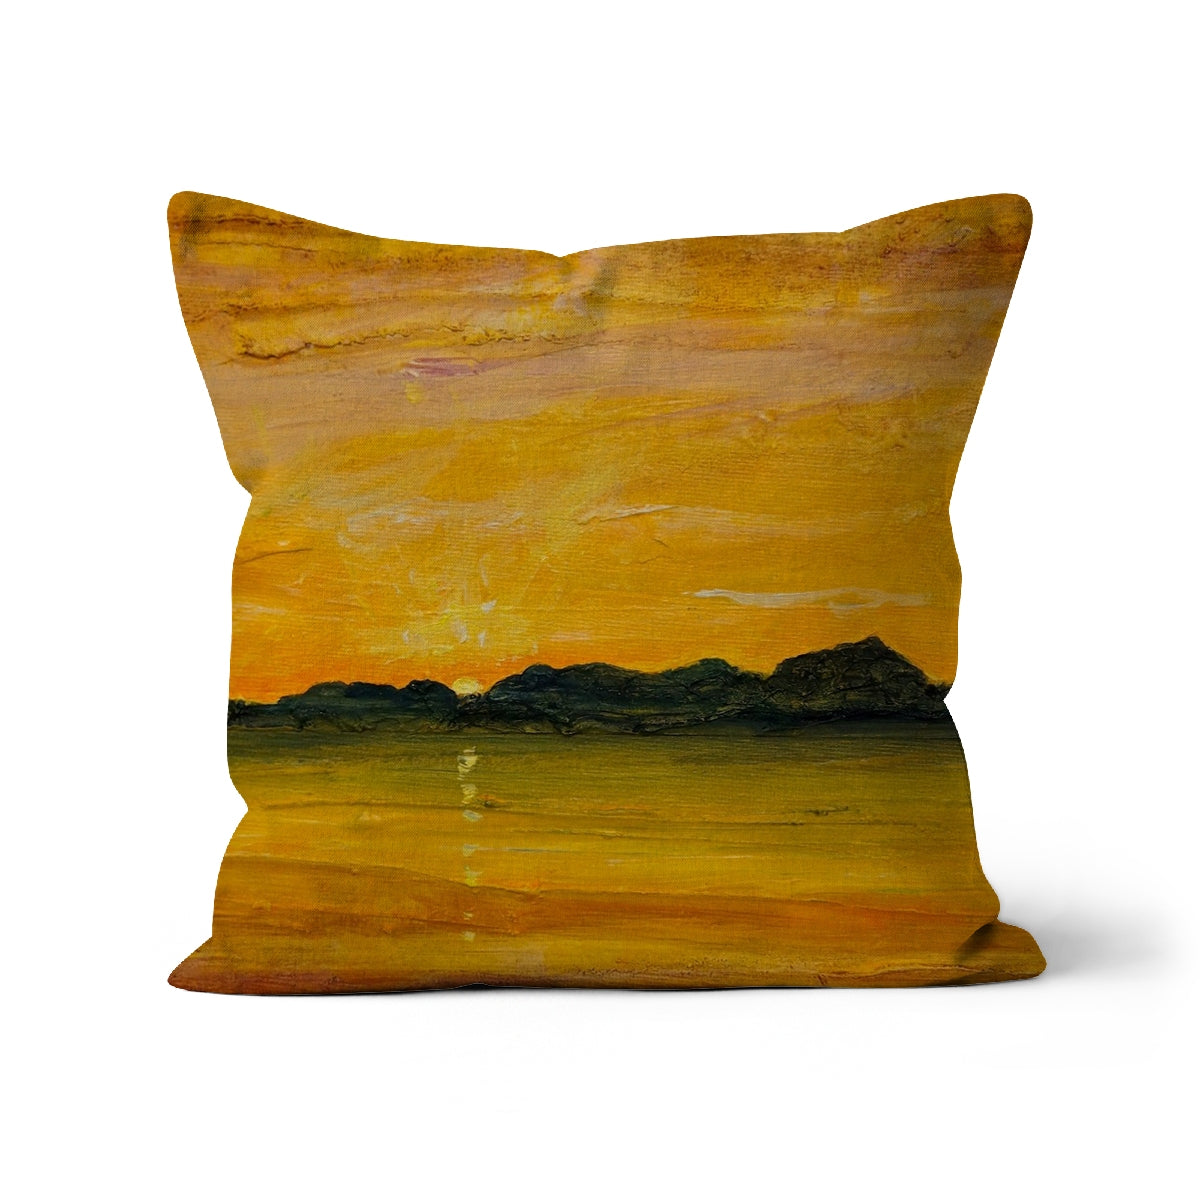 Jura Sunset Art Gifts Cushion-Cushions-Hebridean Islands Art Gallery-Canvas-18"x18"-Paintings, Prints, Homeware, Art Gifts From Scotland By Scottish Artist Kevin Hunter